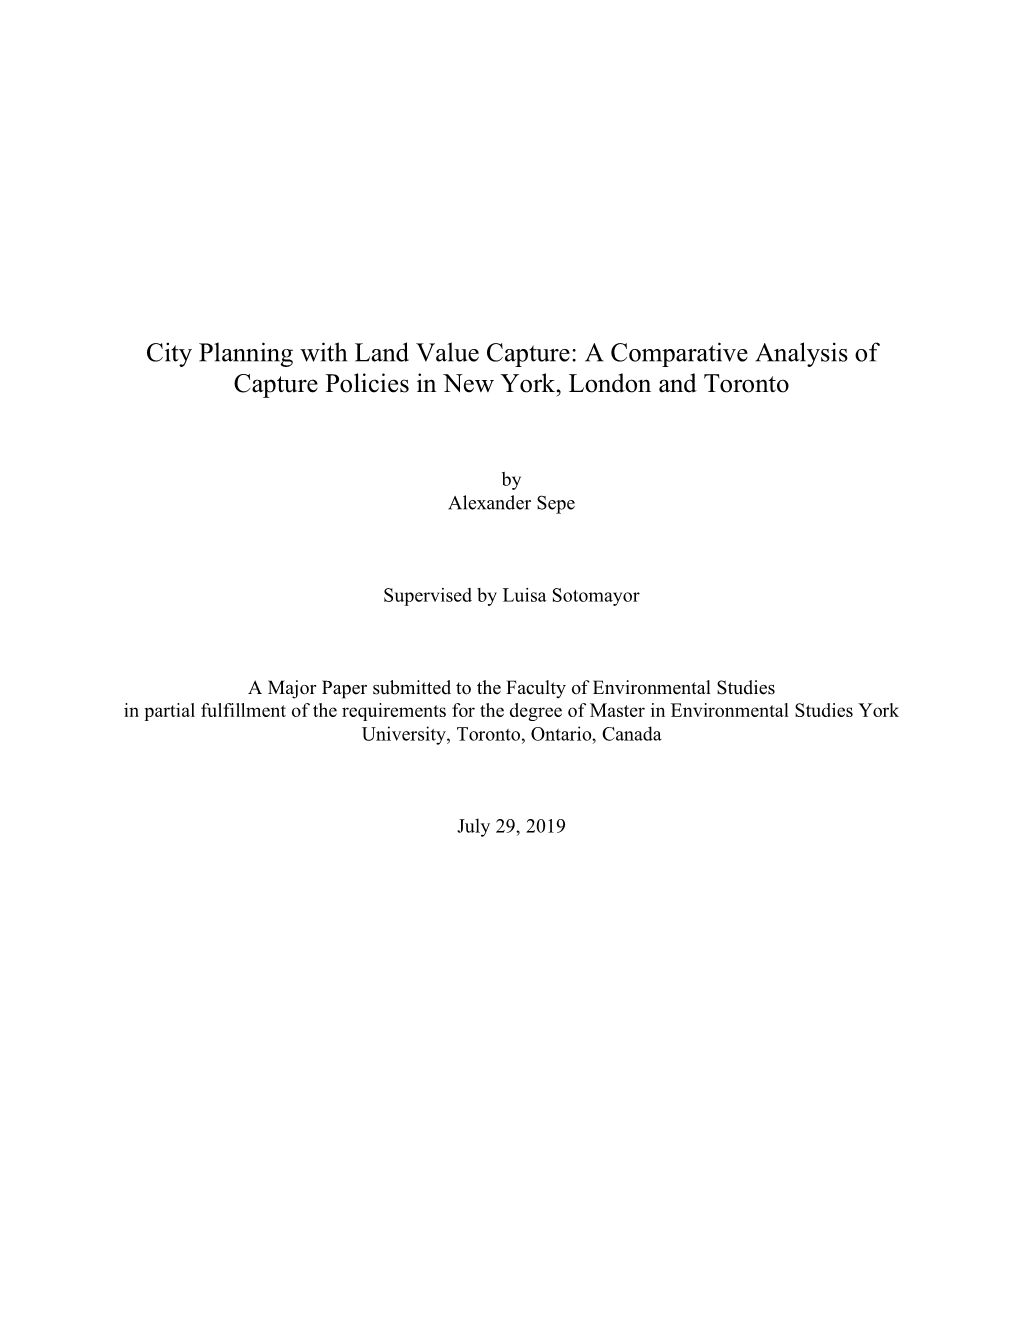 City Planning with Land Value Capture: a Comparative Analysis of Capture Policies in New York, London and Toronto